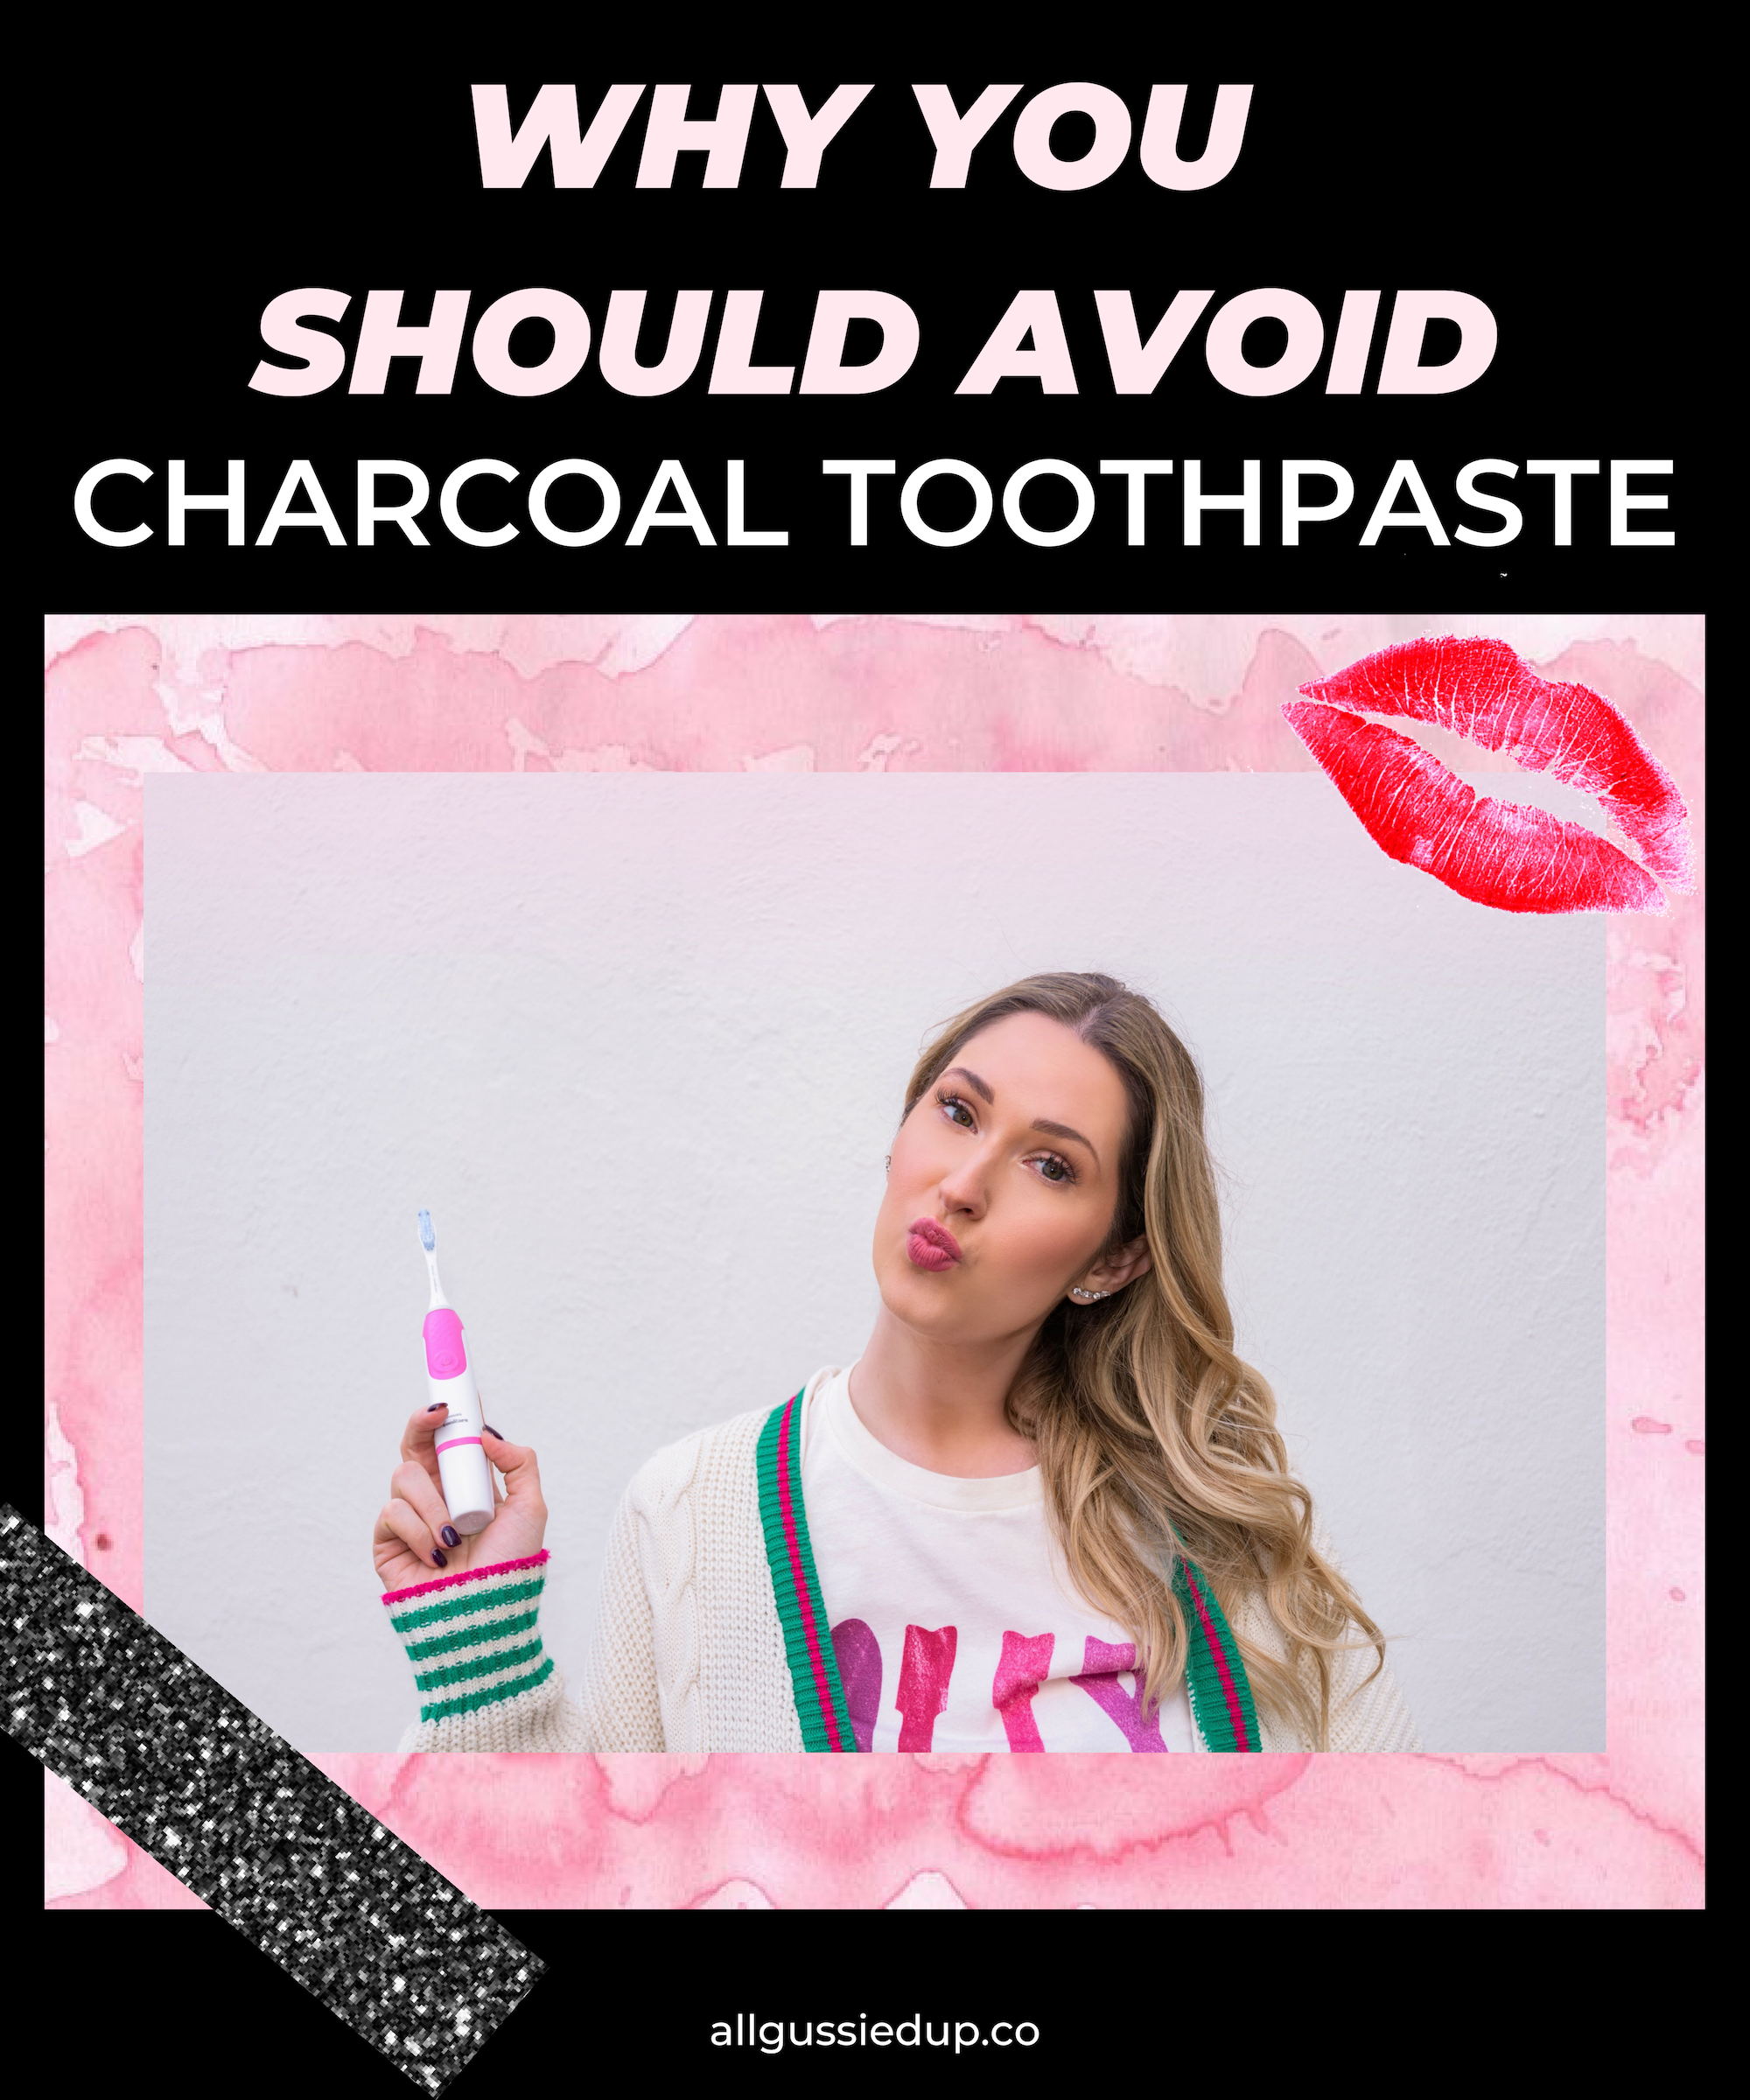 Warning: Charcoal Toothpaste